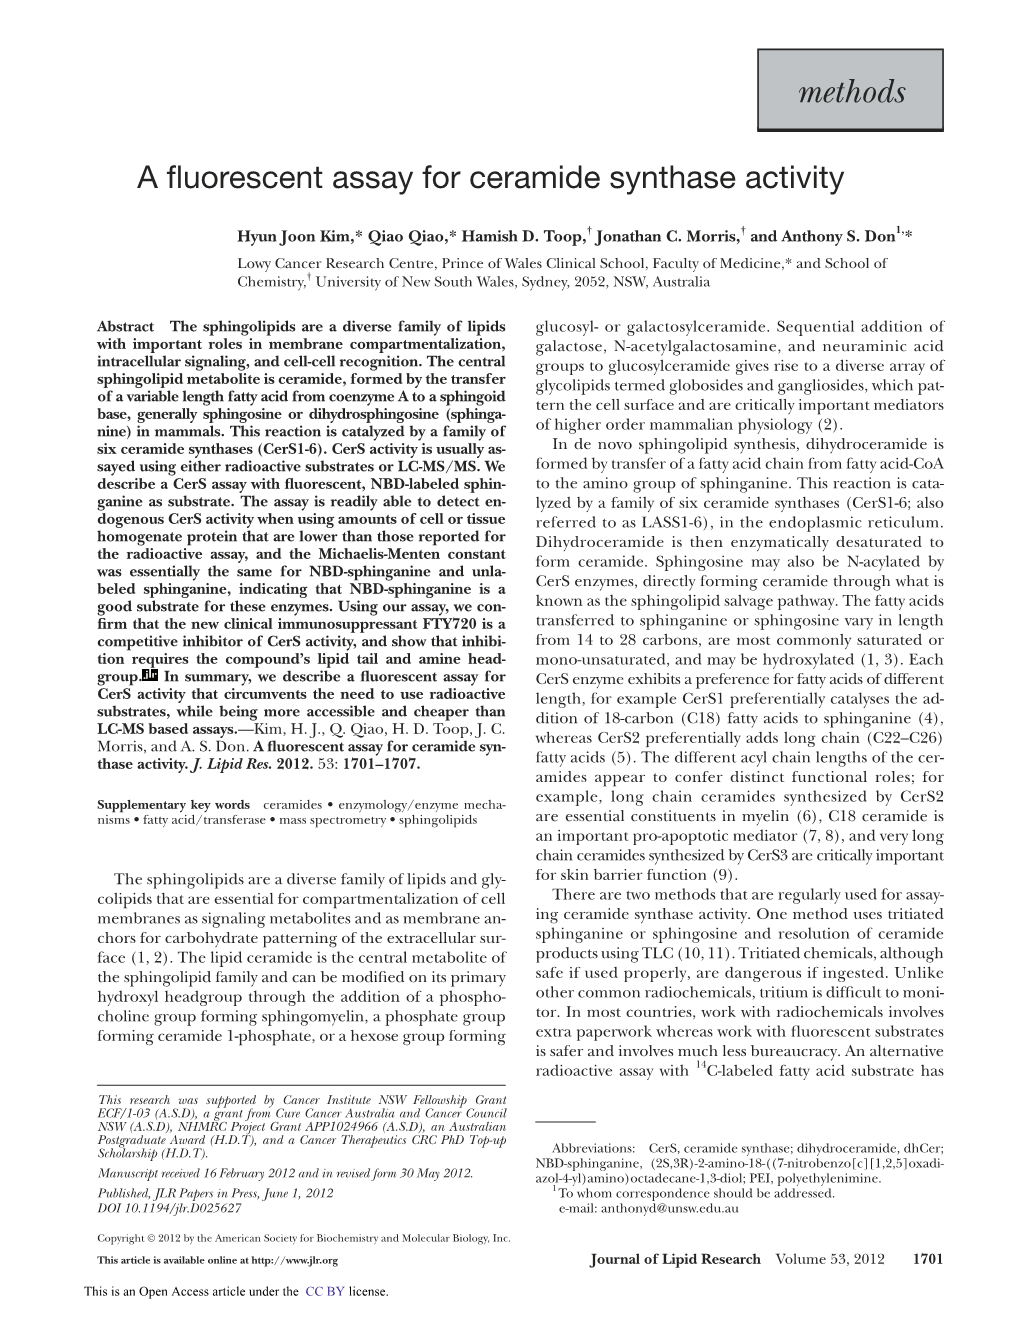 A Fluorescent Assay for Ceramide Synthase Activity